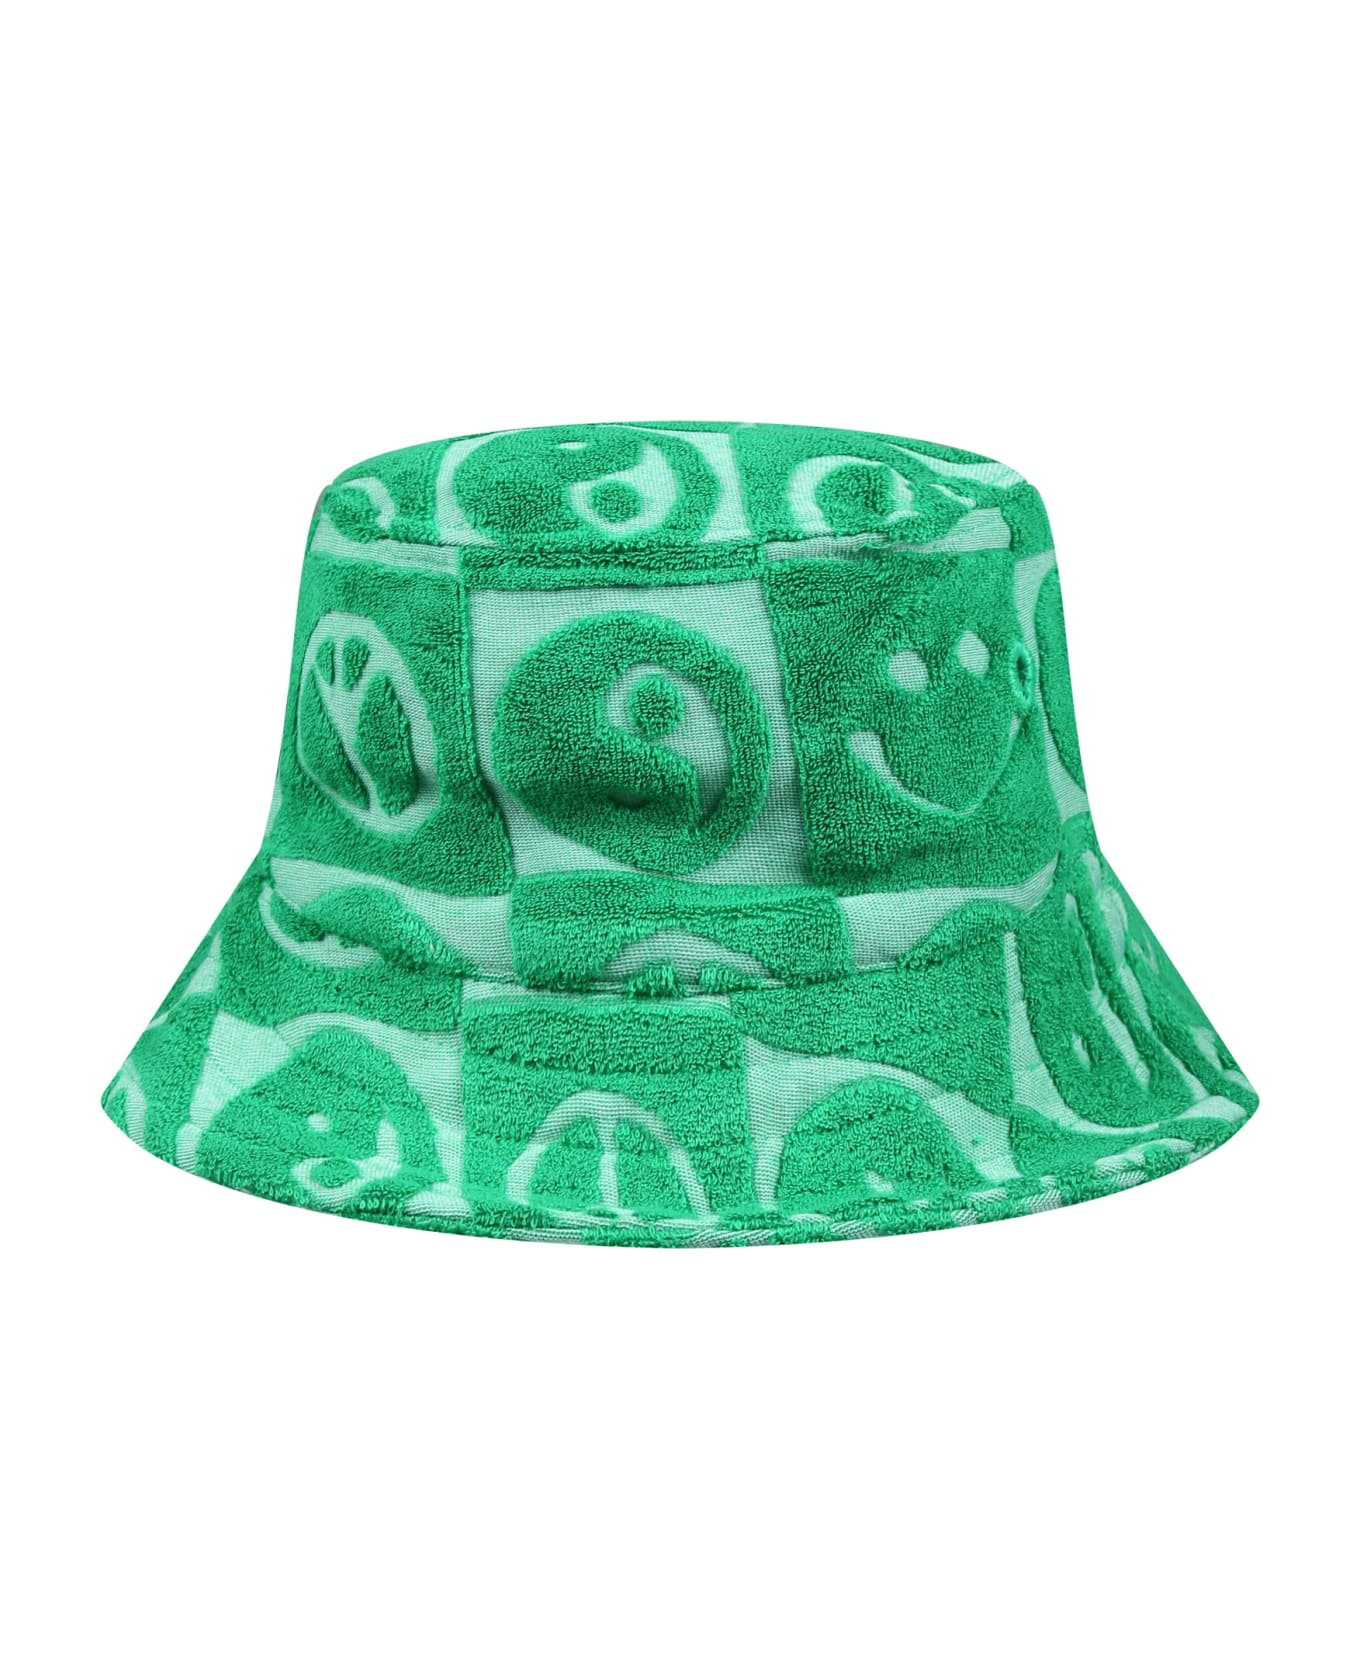 Molo Green Cloche For Kids With Yin And Yang - Green アクセサリー＆ギフト